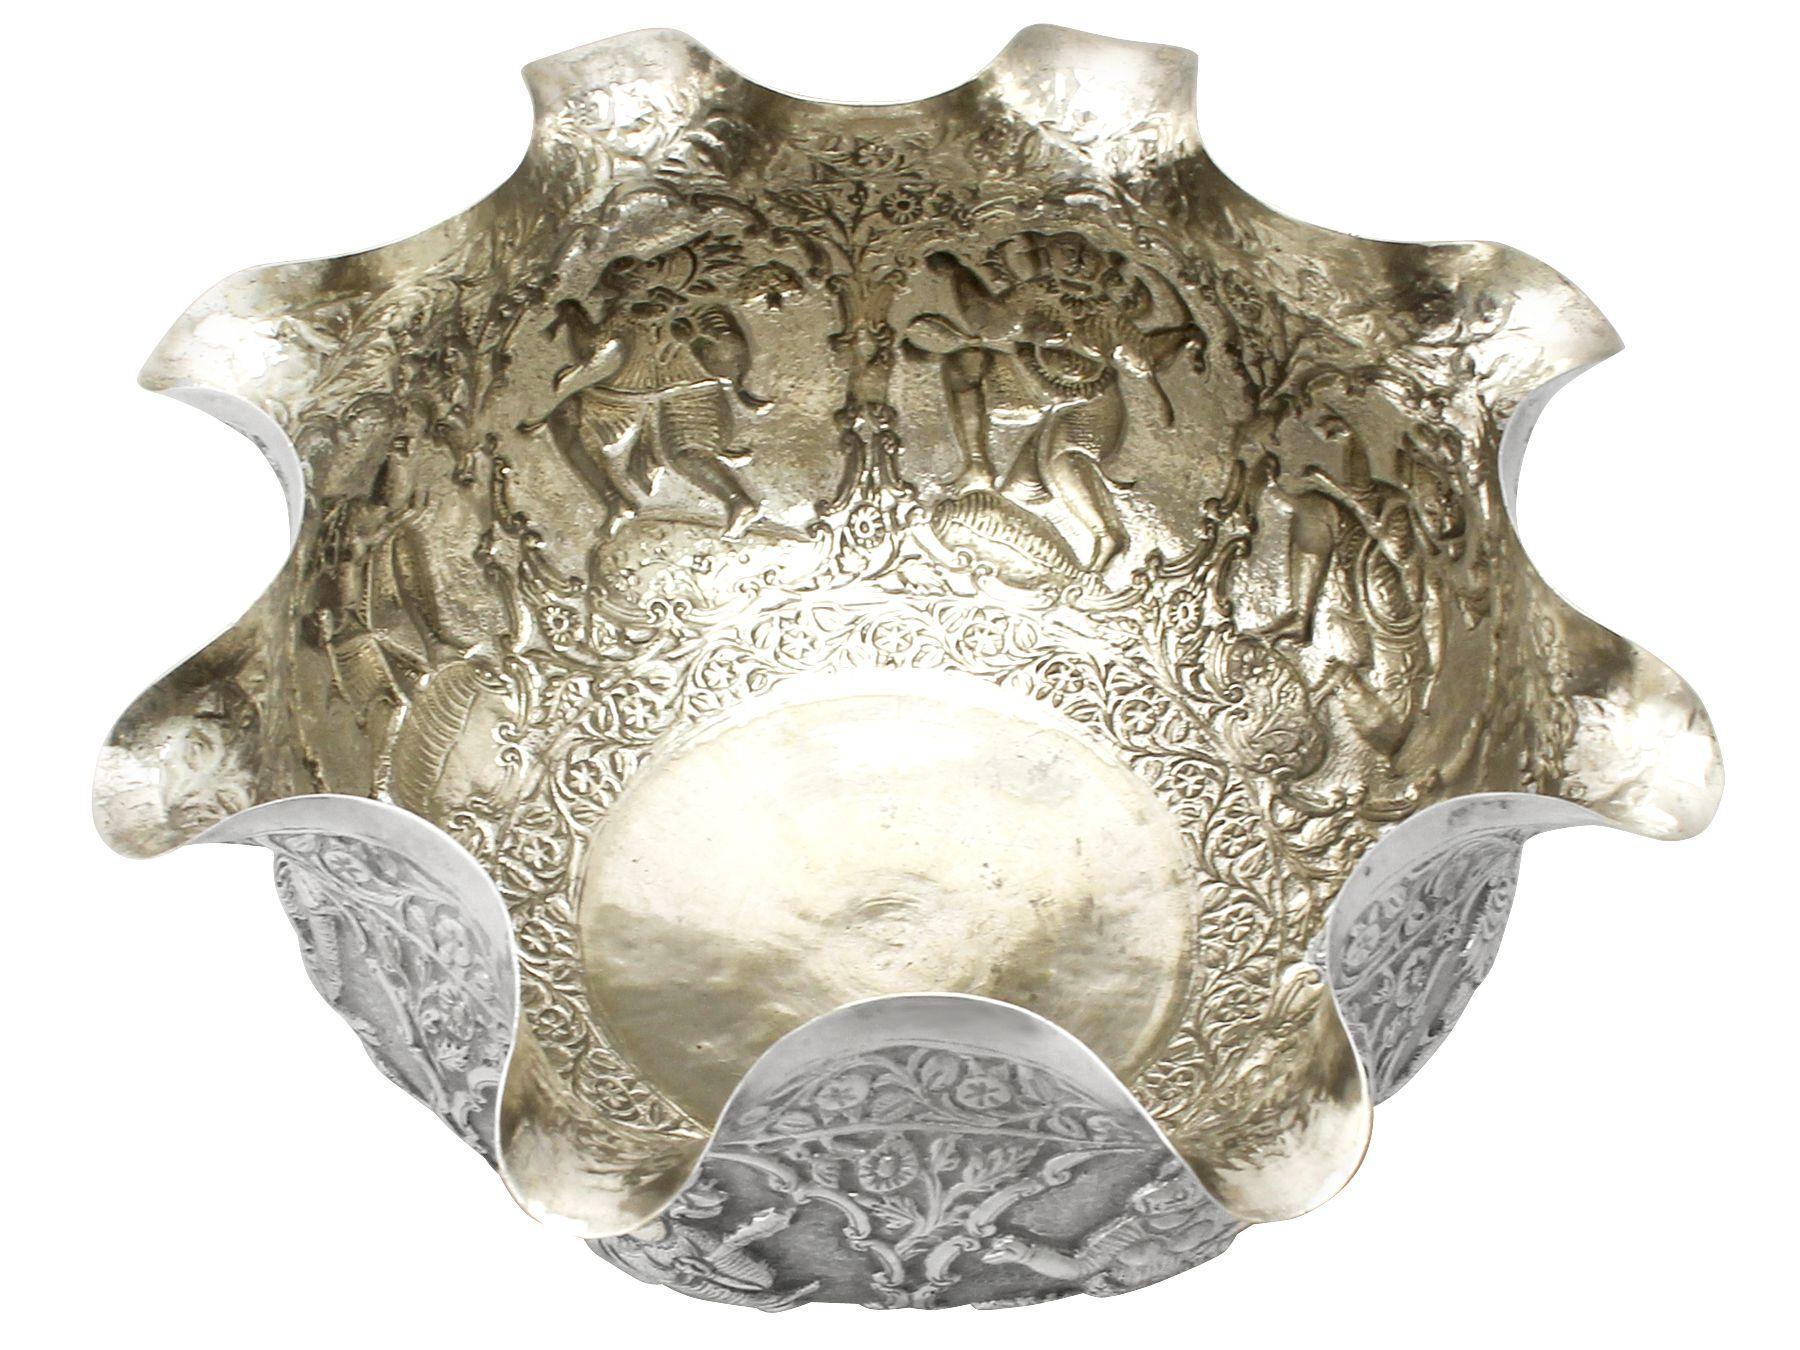 Antique Burmese Silver Bowl In Excellent Condition For Sale In Jesmond, Newcastle Upon Tyne